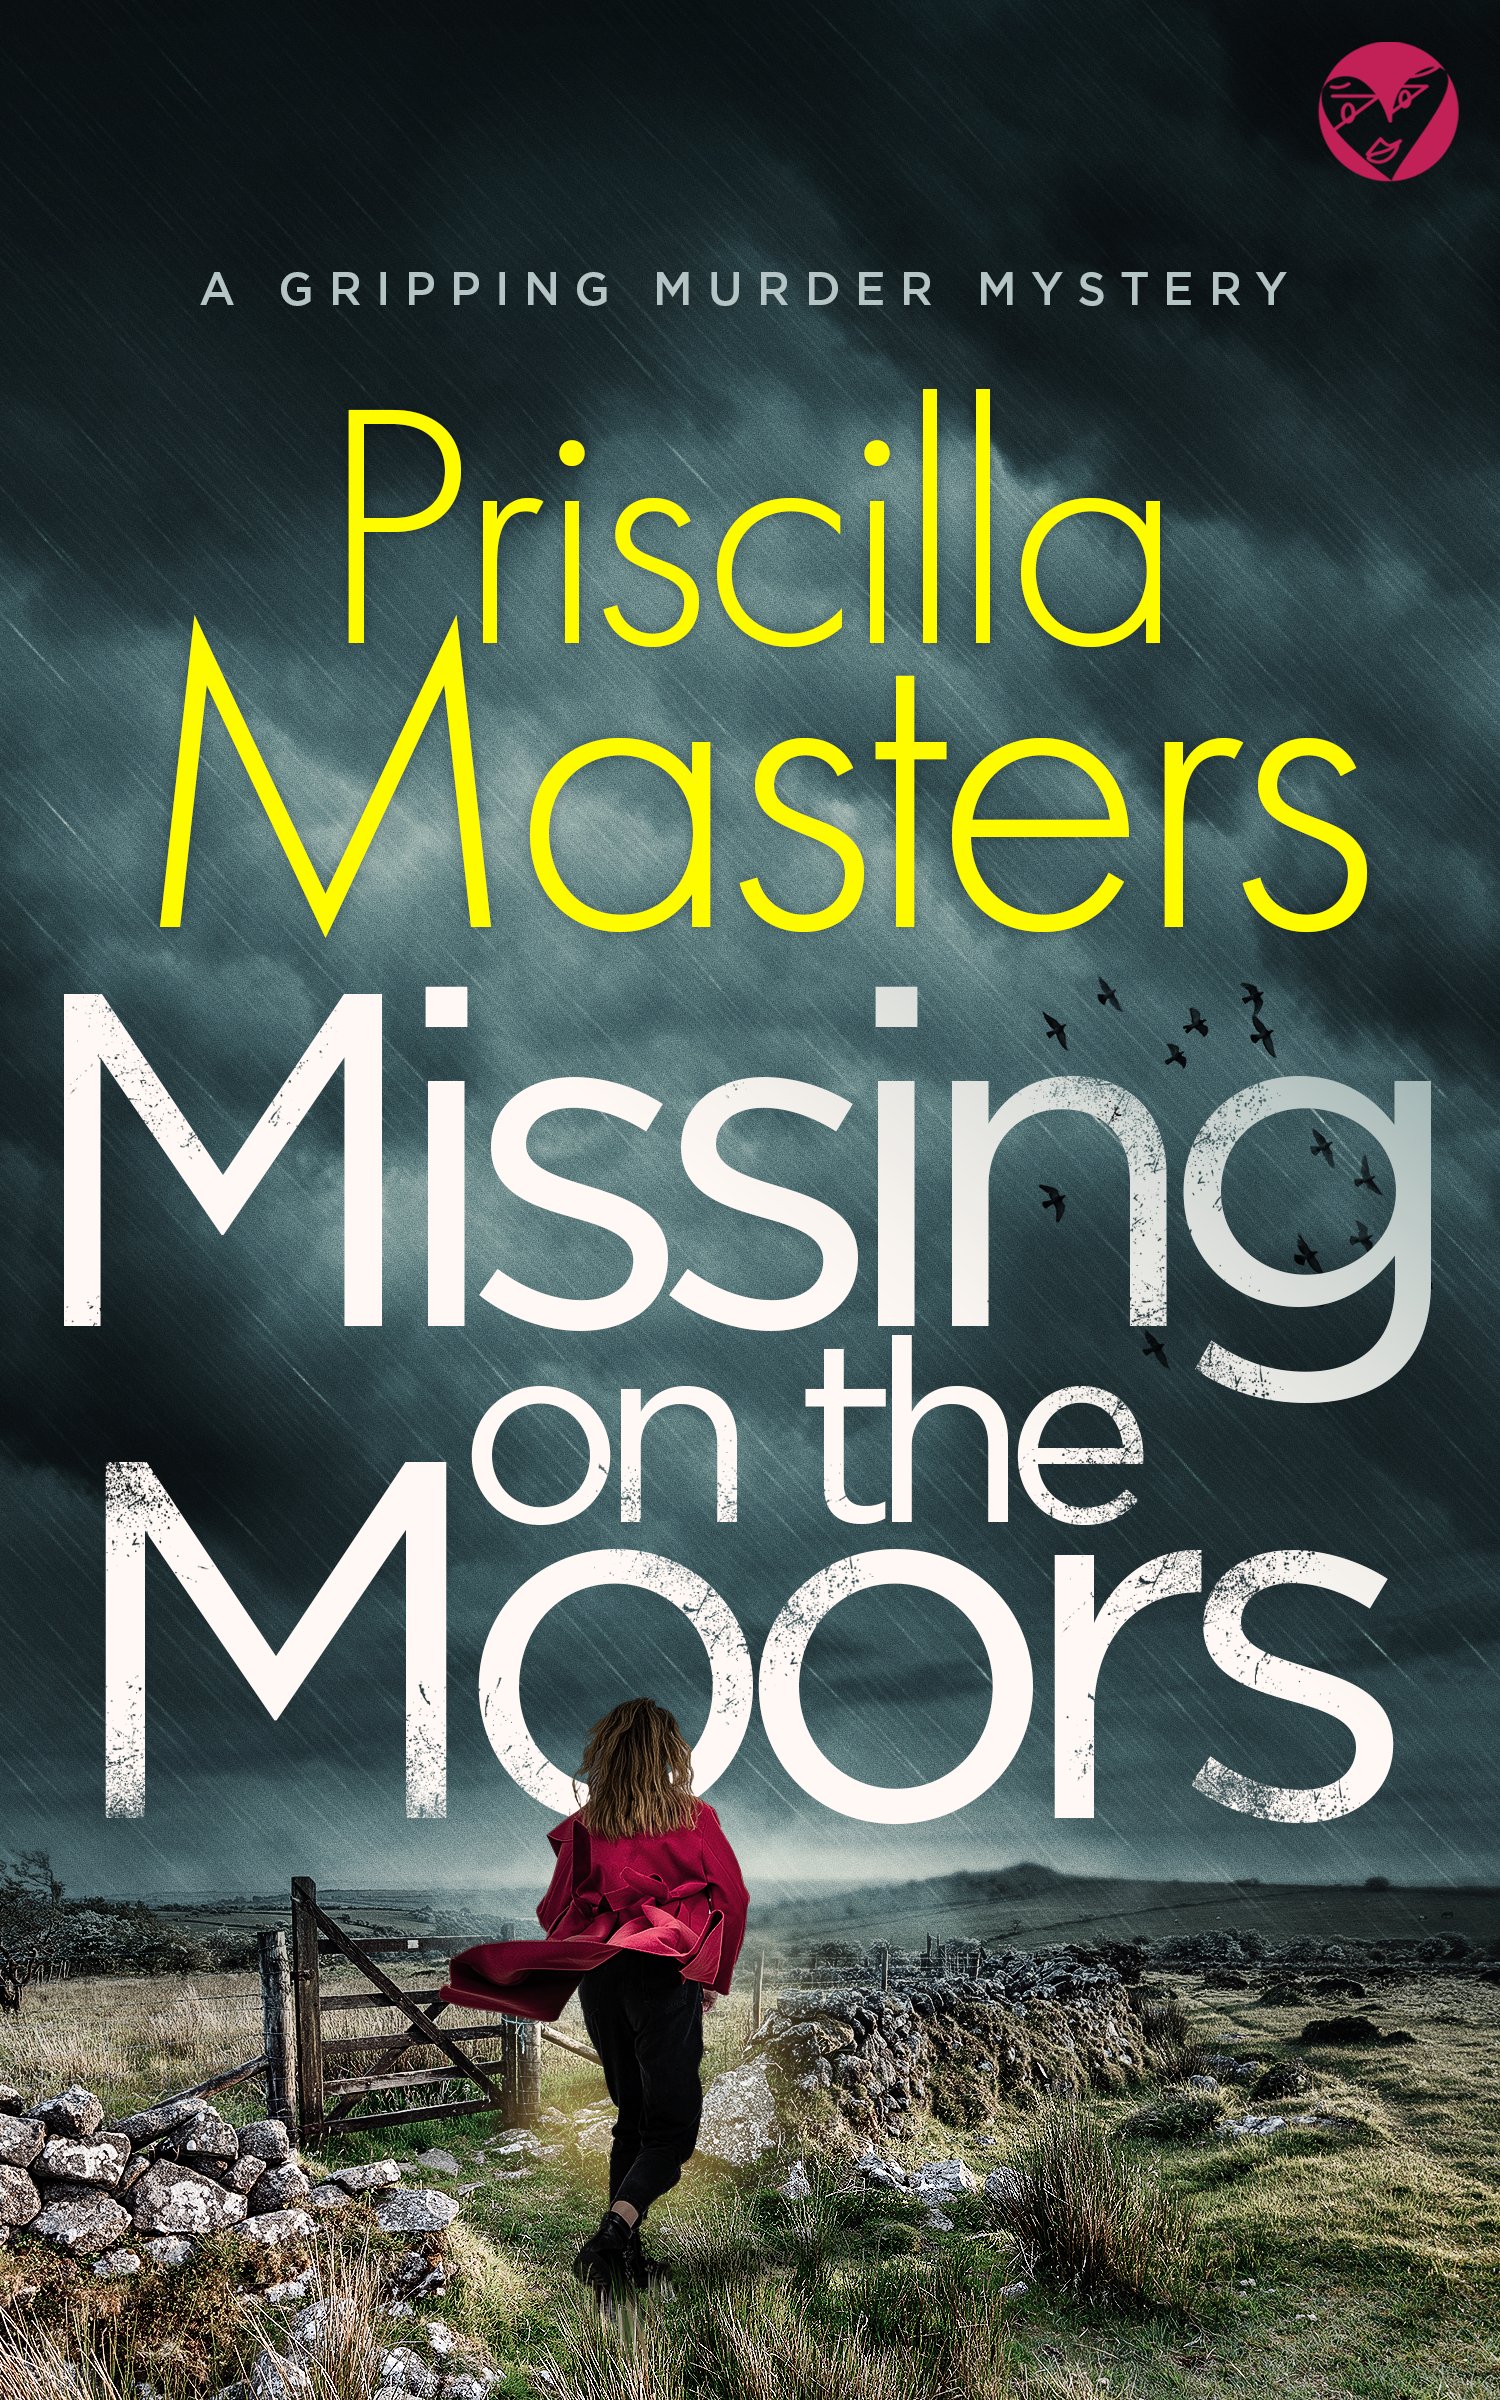 MISSING ON THE MOORS Cover publish.jpg